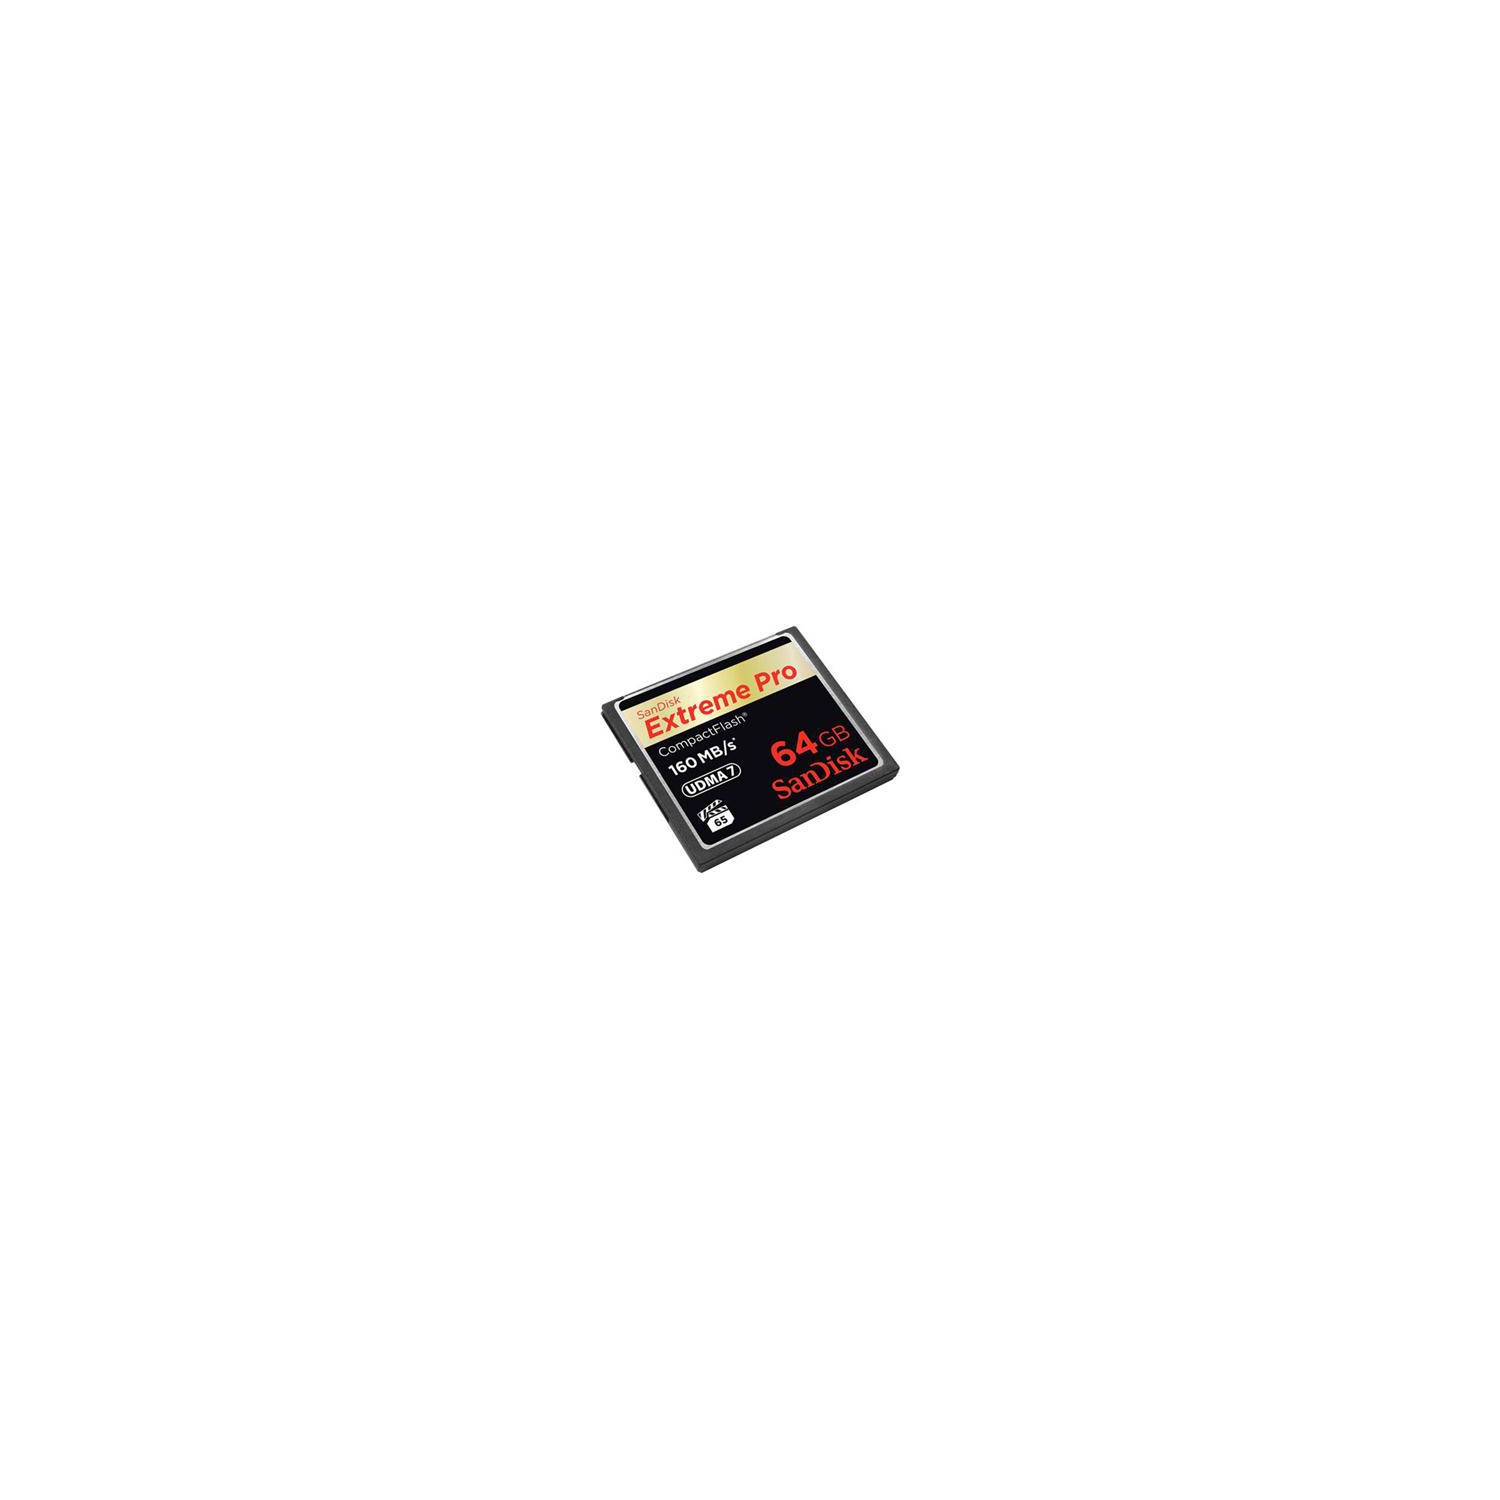 SANDISK EXTREME PRO 64GB COMPACT FLASH MEMORY CARD UDMA 7 SPEED UP TO 160MB/SSDCFXPS-064G-X46 (LABEL MAY CHANGE)